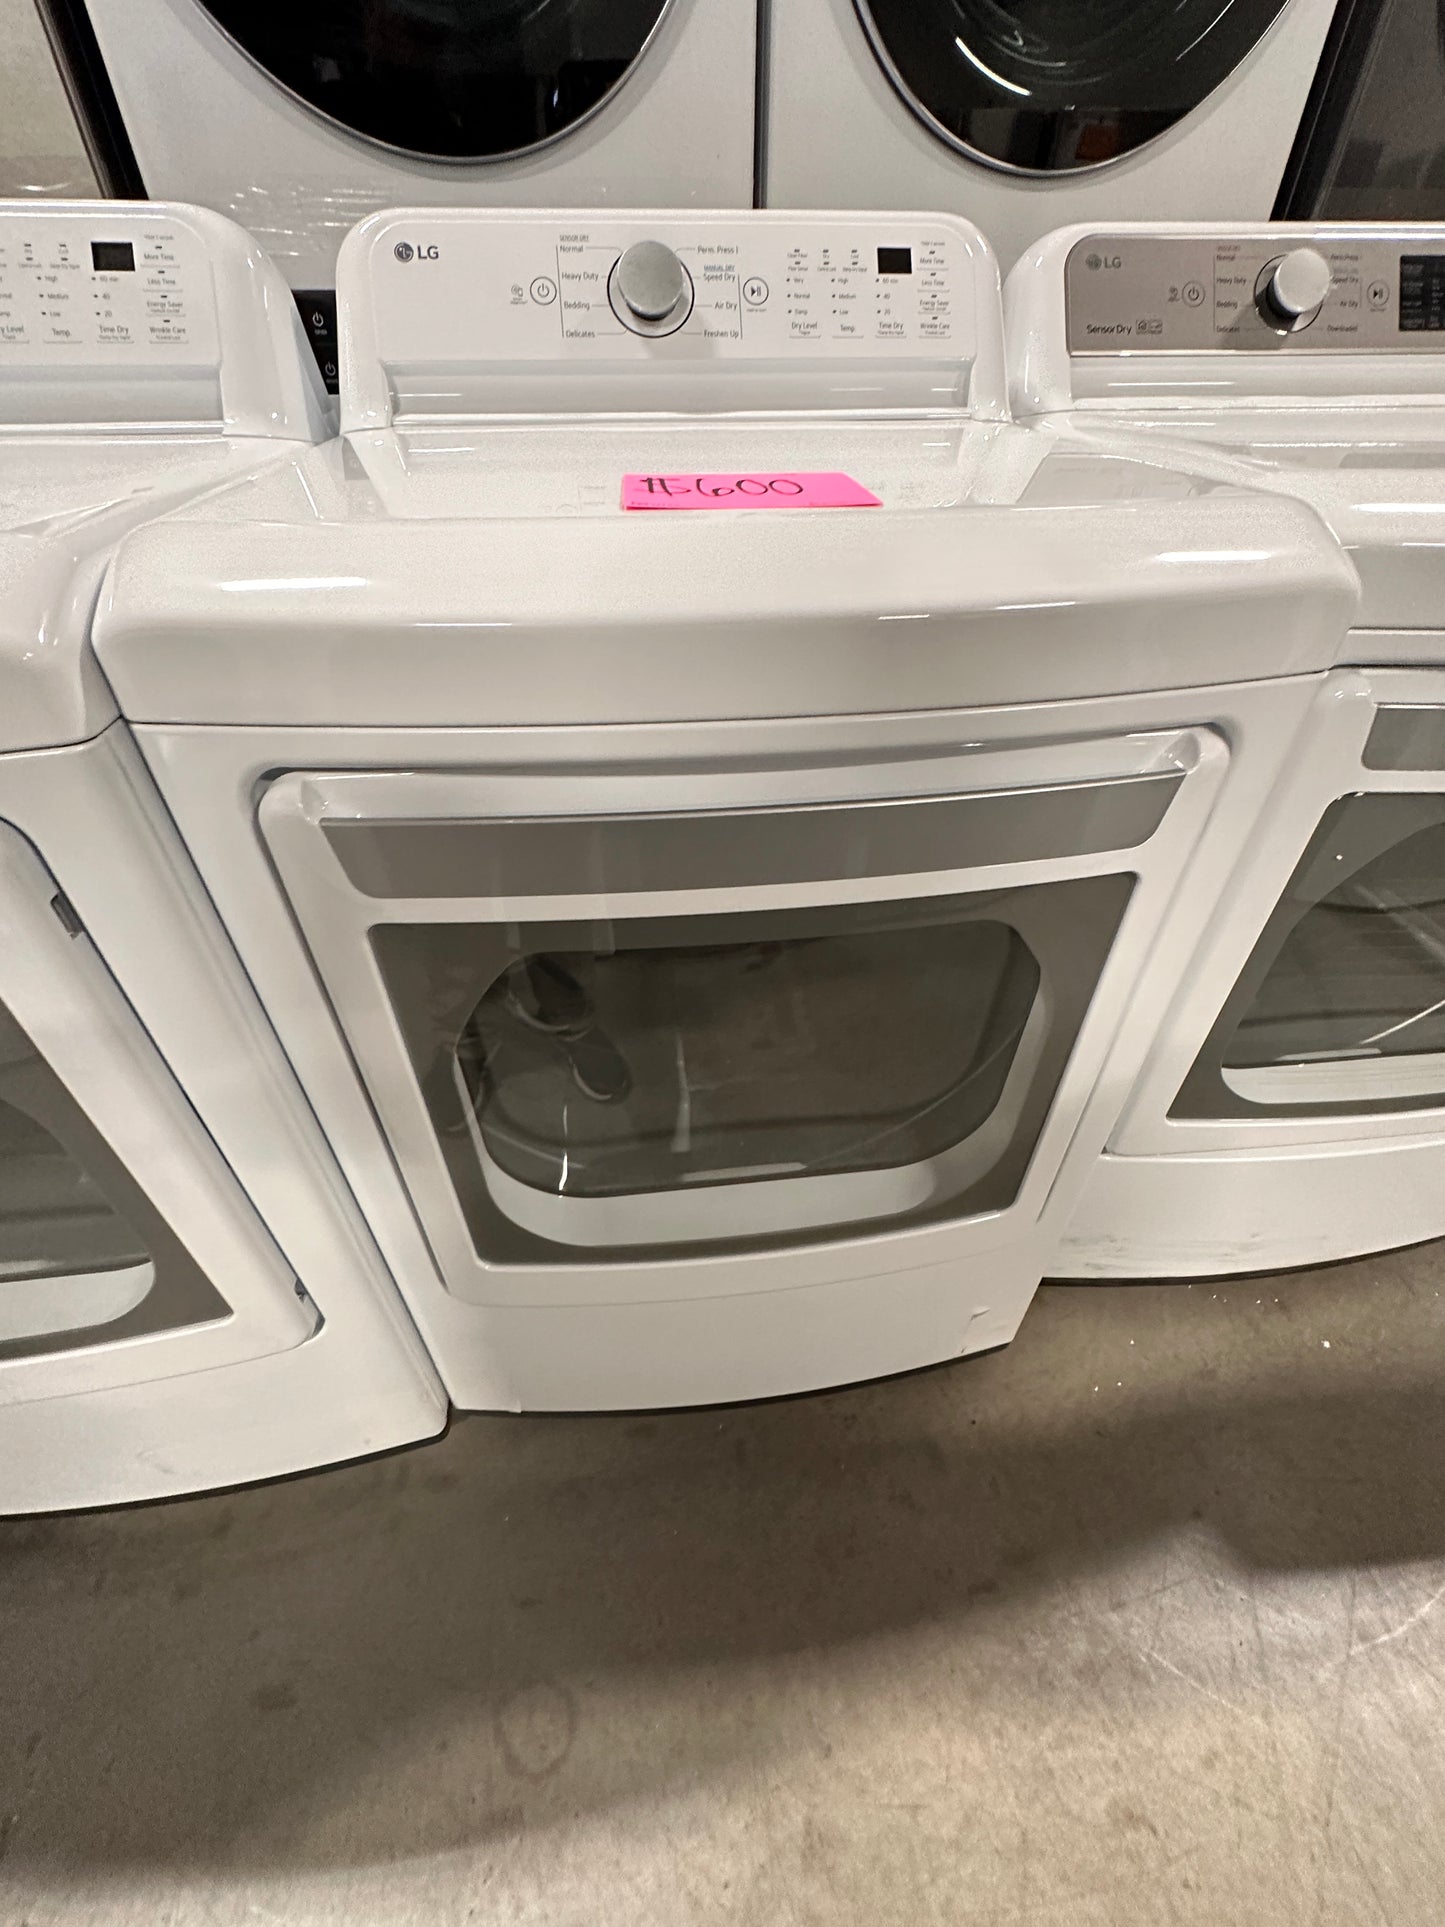 LG 7.3 CU FT ELECTRIC DRYER WITH SENSOR DRY - DRY12133